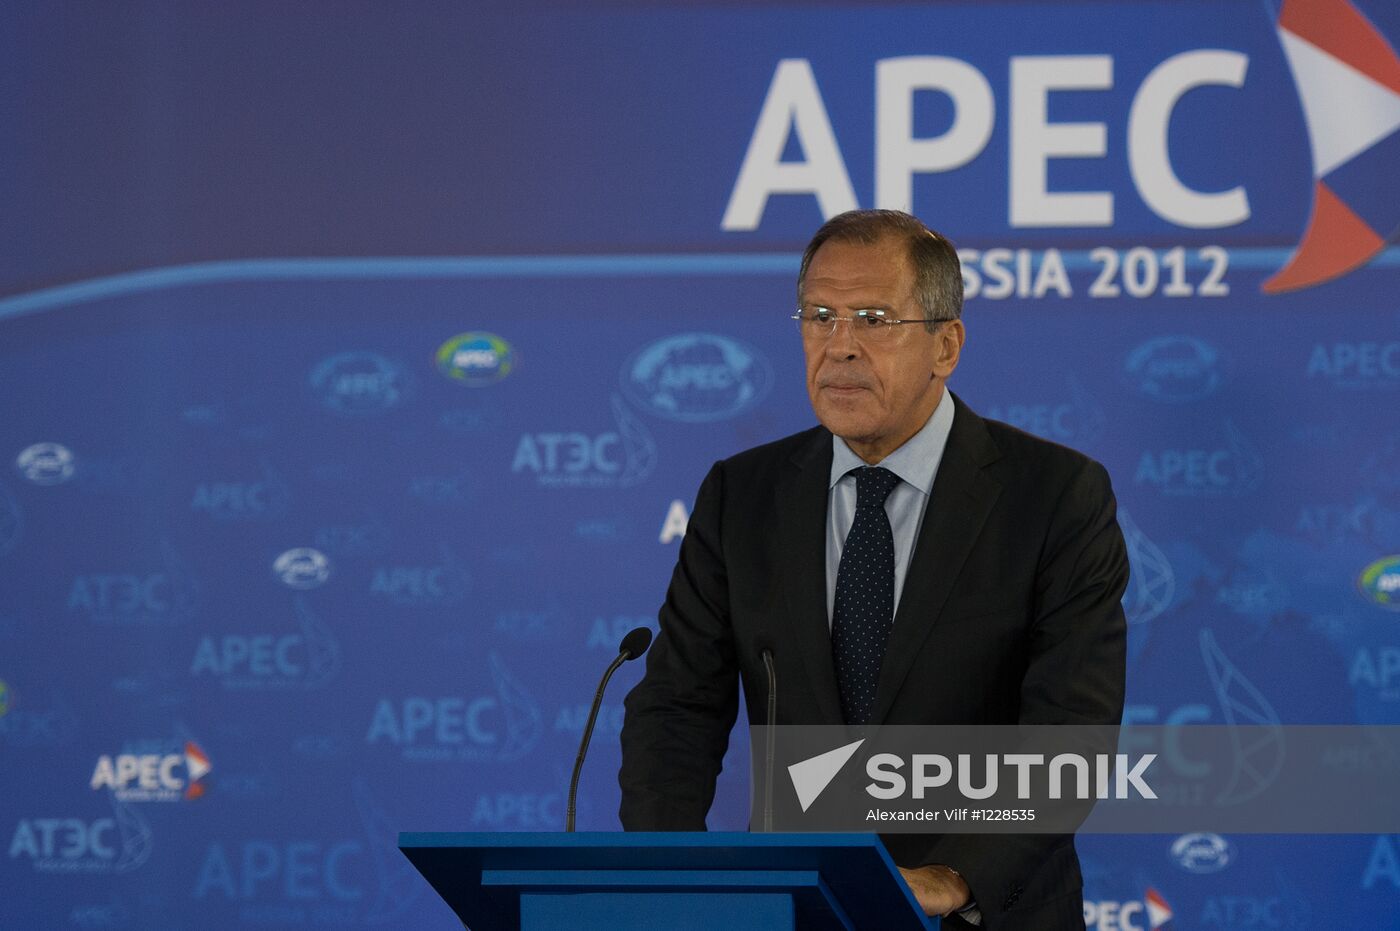 News conference by Minister of Foreign Affairs Sergey Lavrov